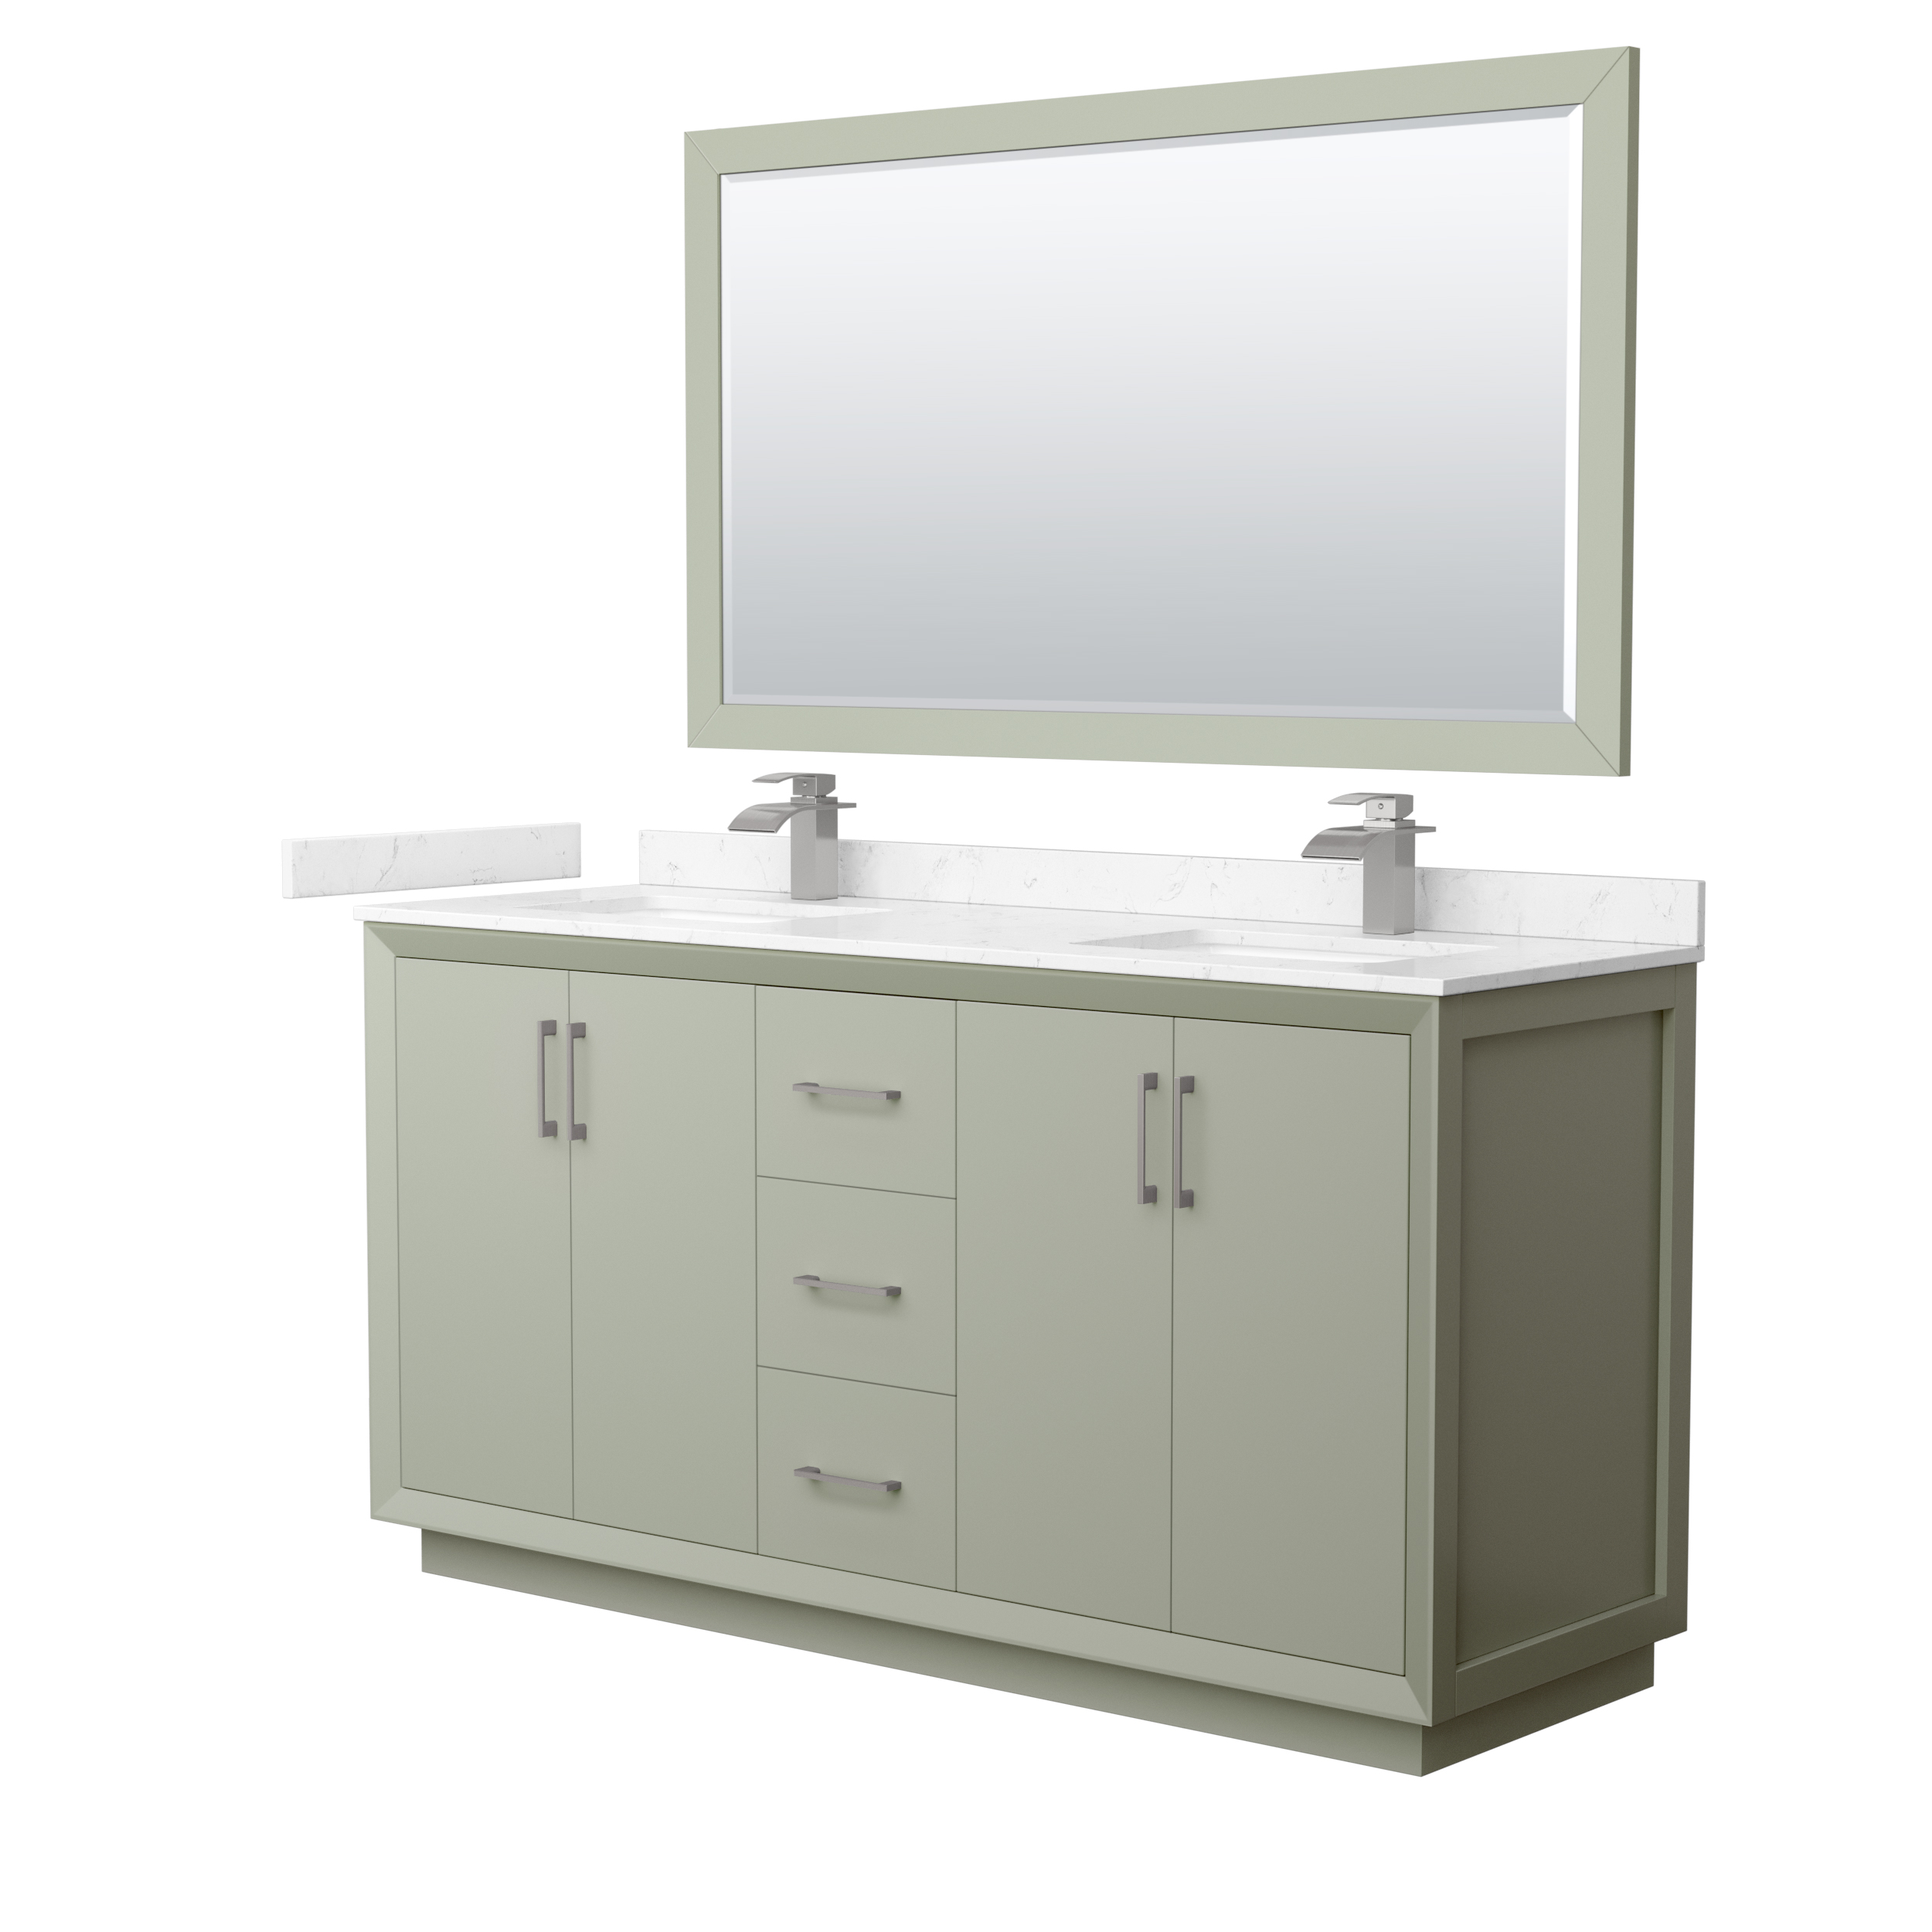 Strada 66" Double Vanity with optional Cultured Marble Counter - Light Green WC-4141-66-DBL-VAN-LGN-